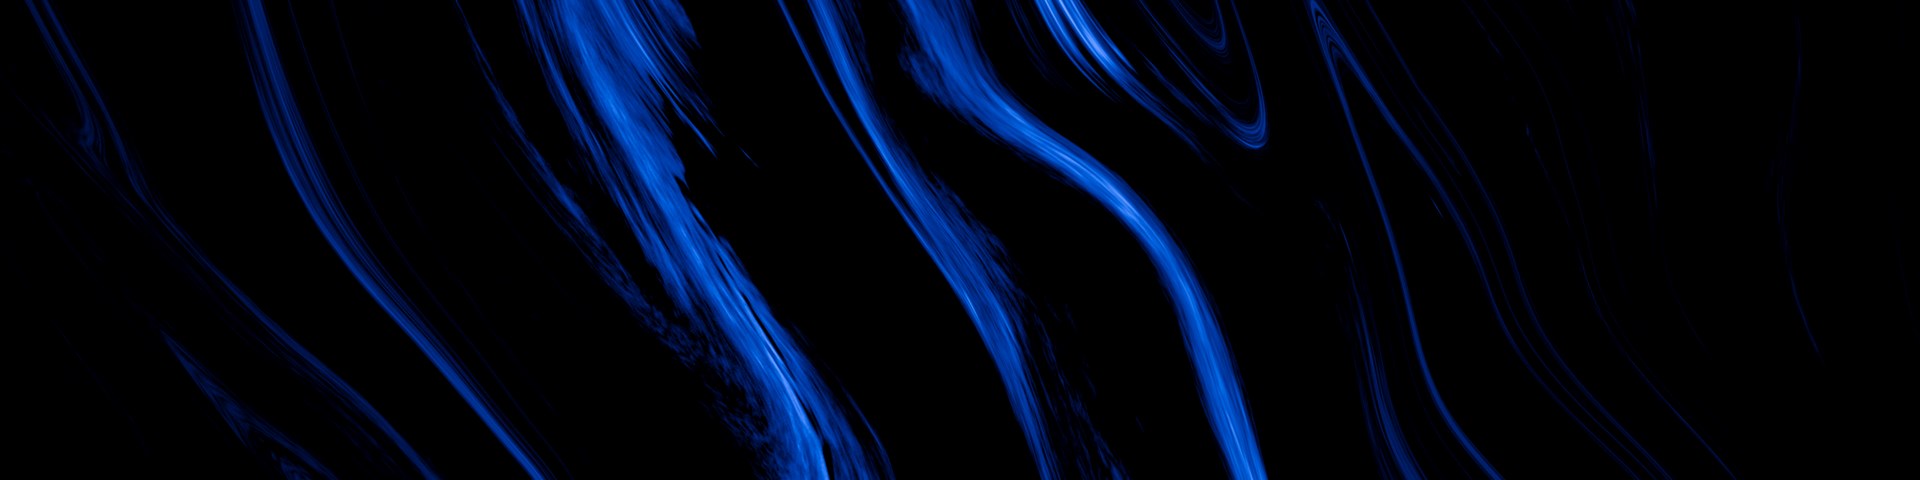 Bright blue texture on black background